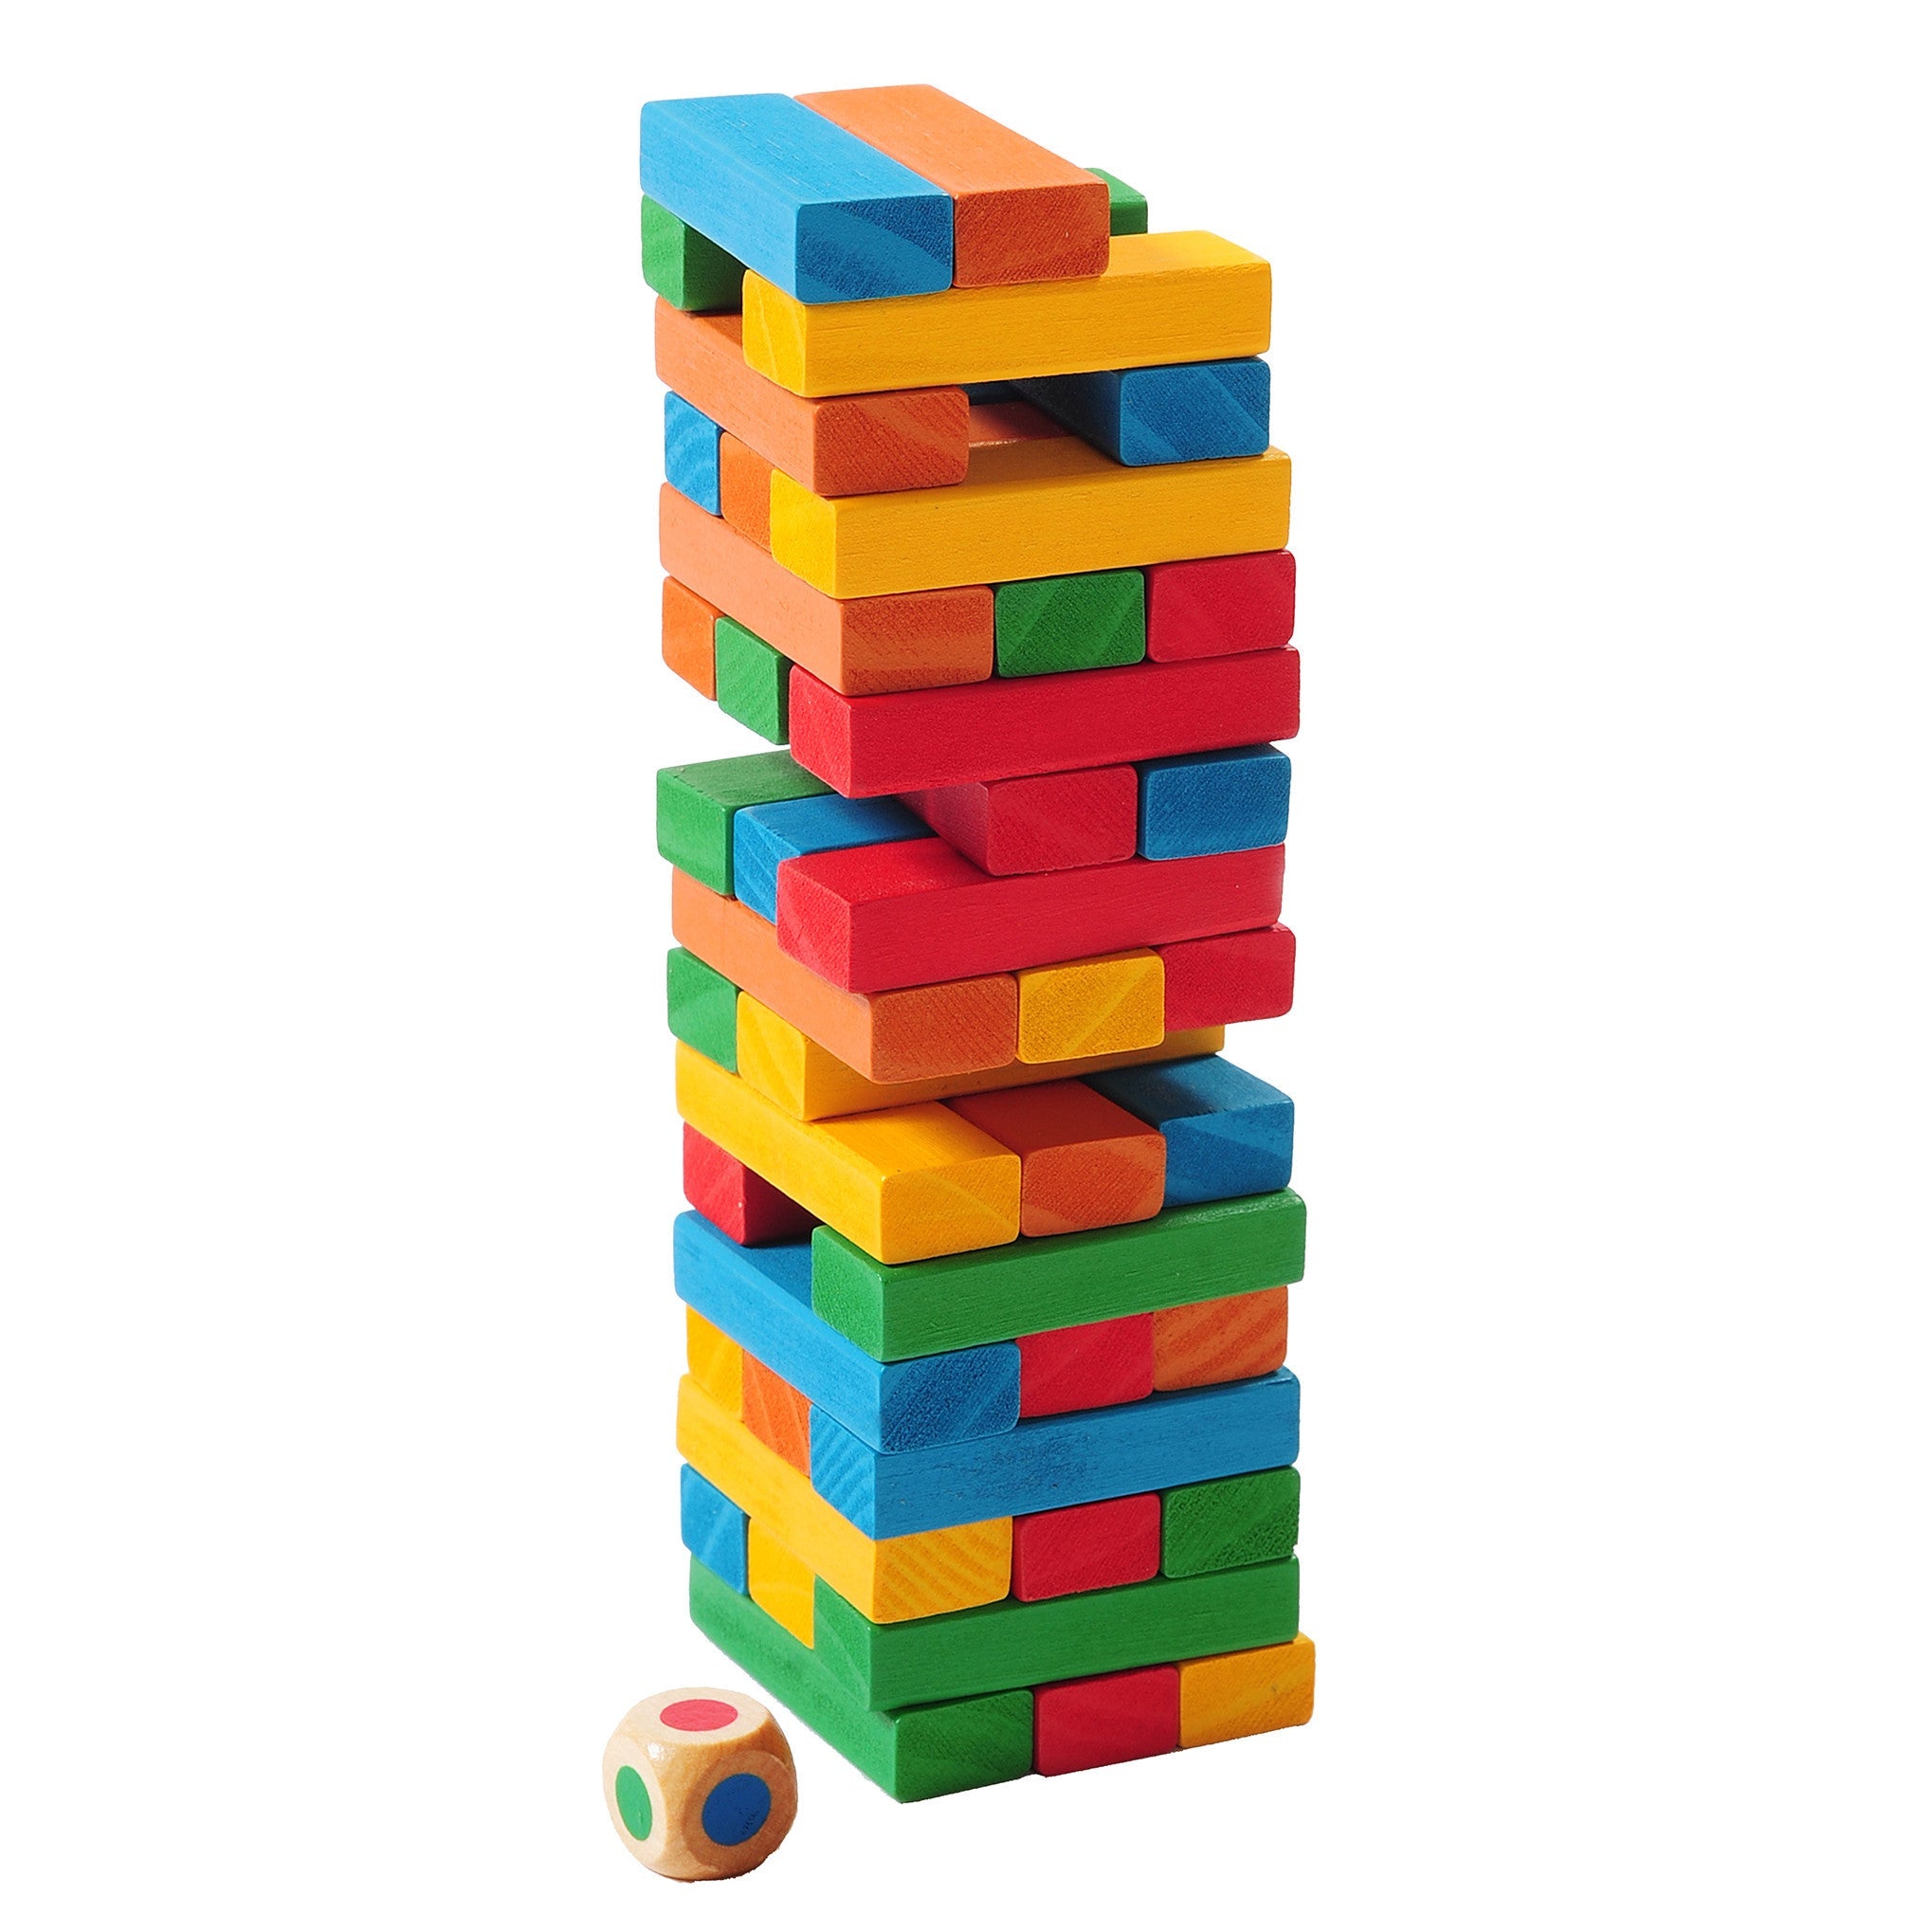 TRAVEL SIZE BACKPACK TUMBLING TOWER - Outside Inside Gifts and Games